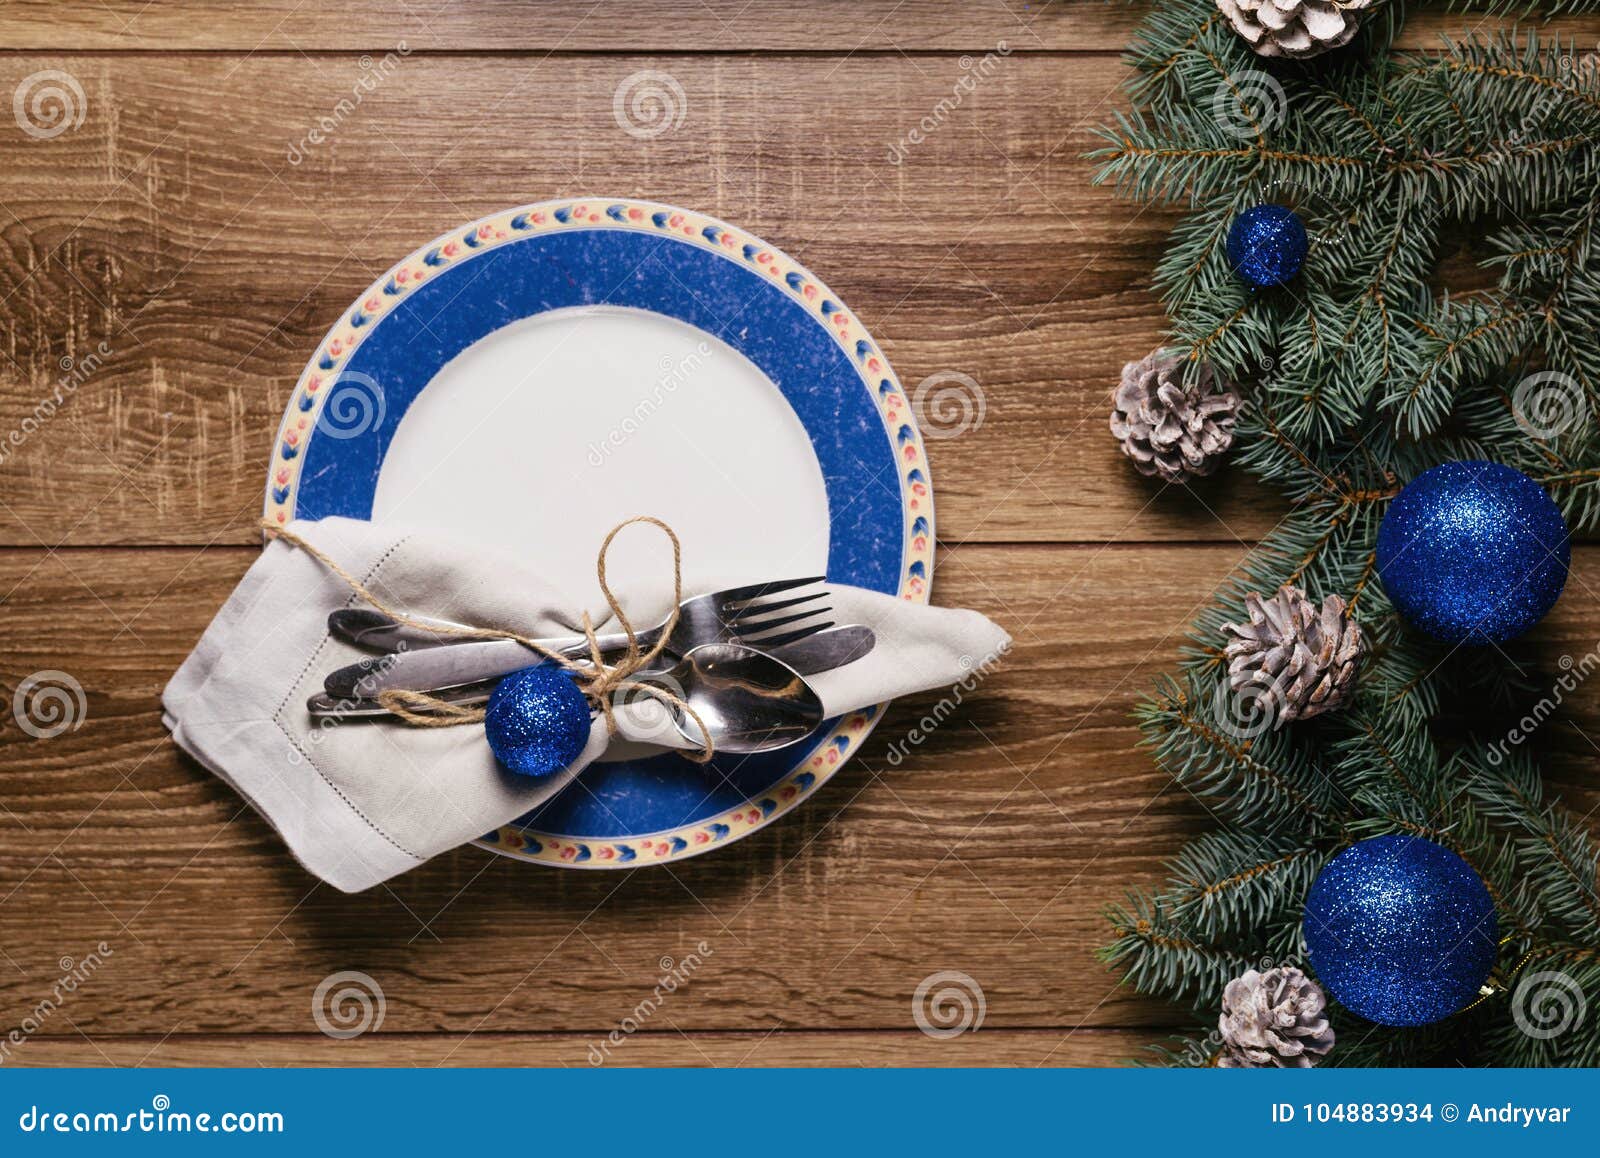 Christmas Table, Serving in Blue Tones Stock Photo - Image of green ...